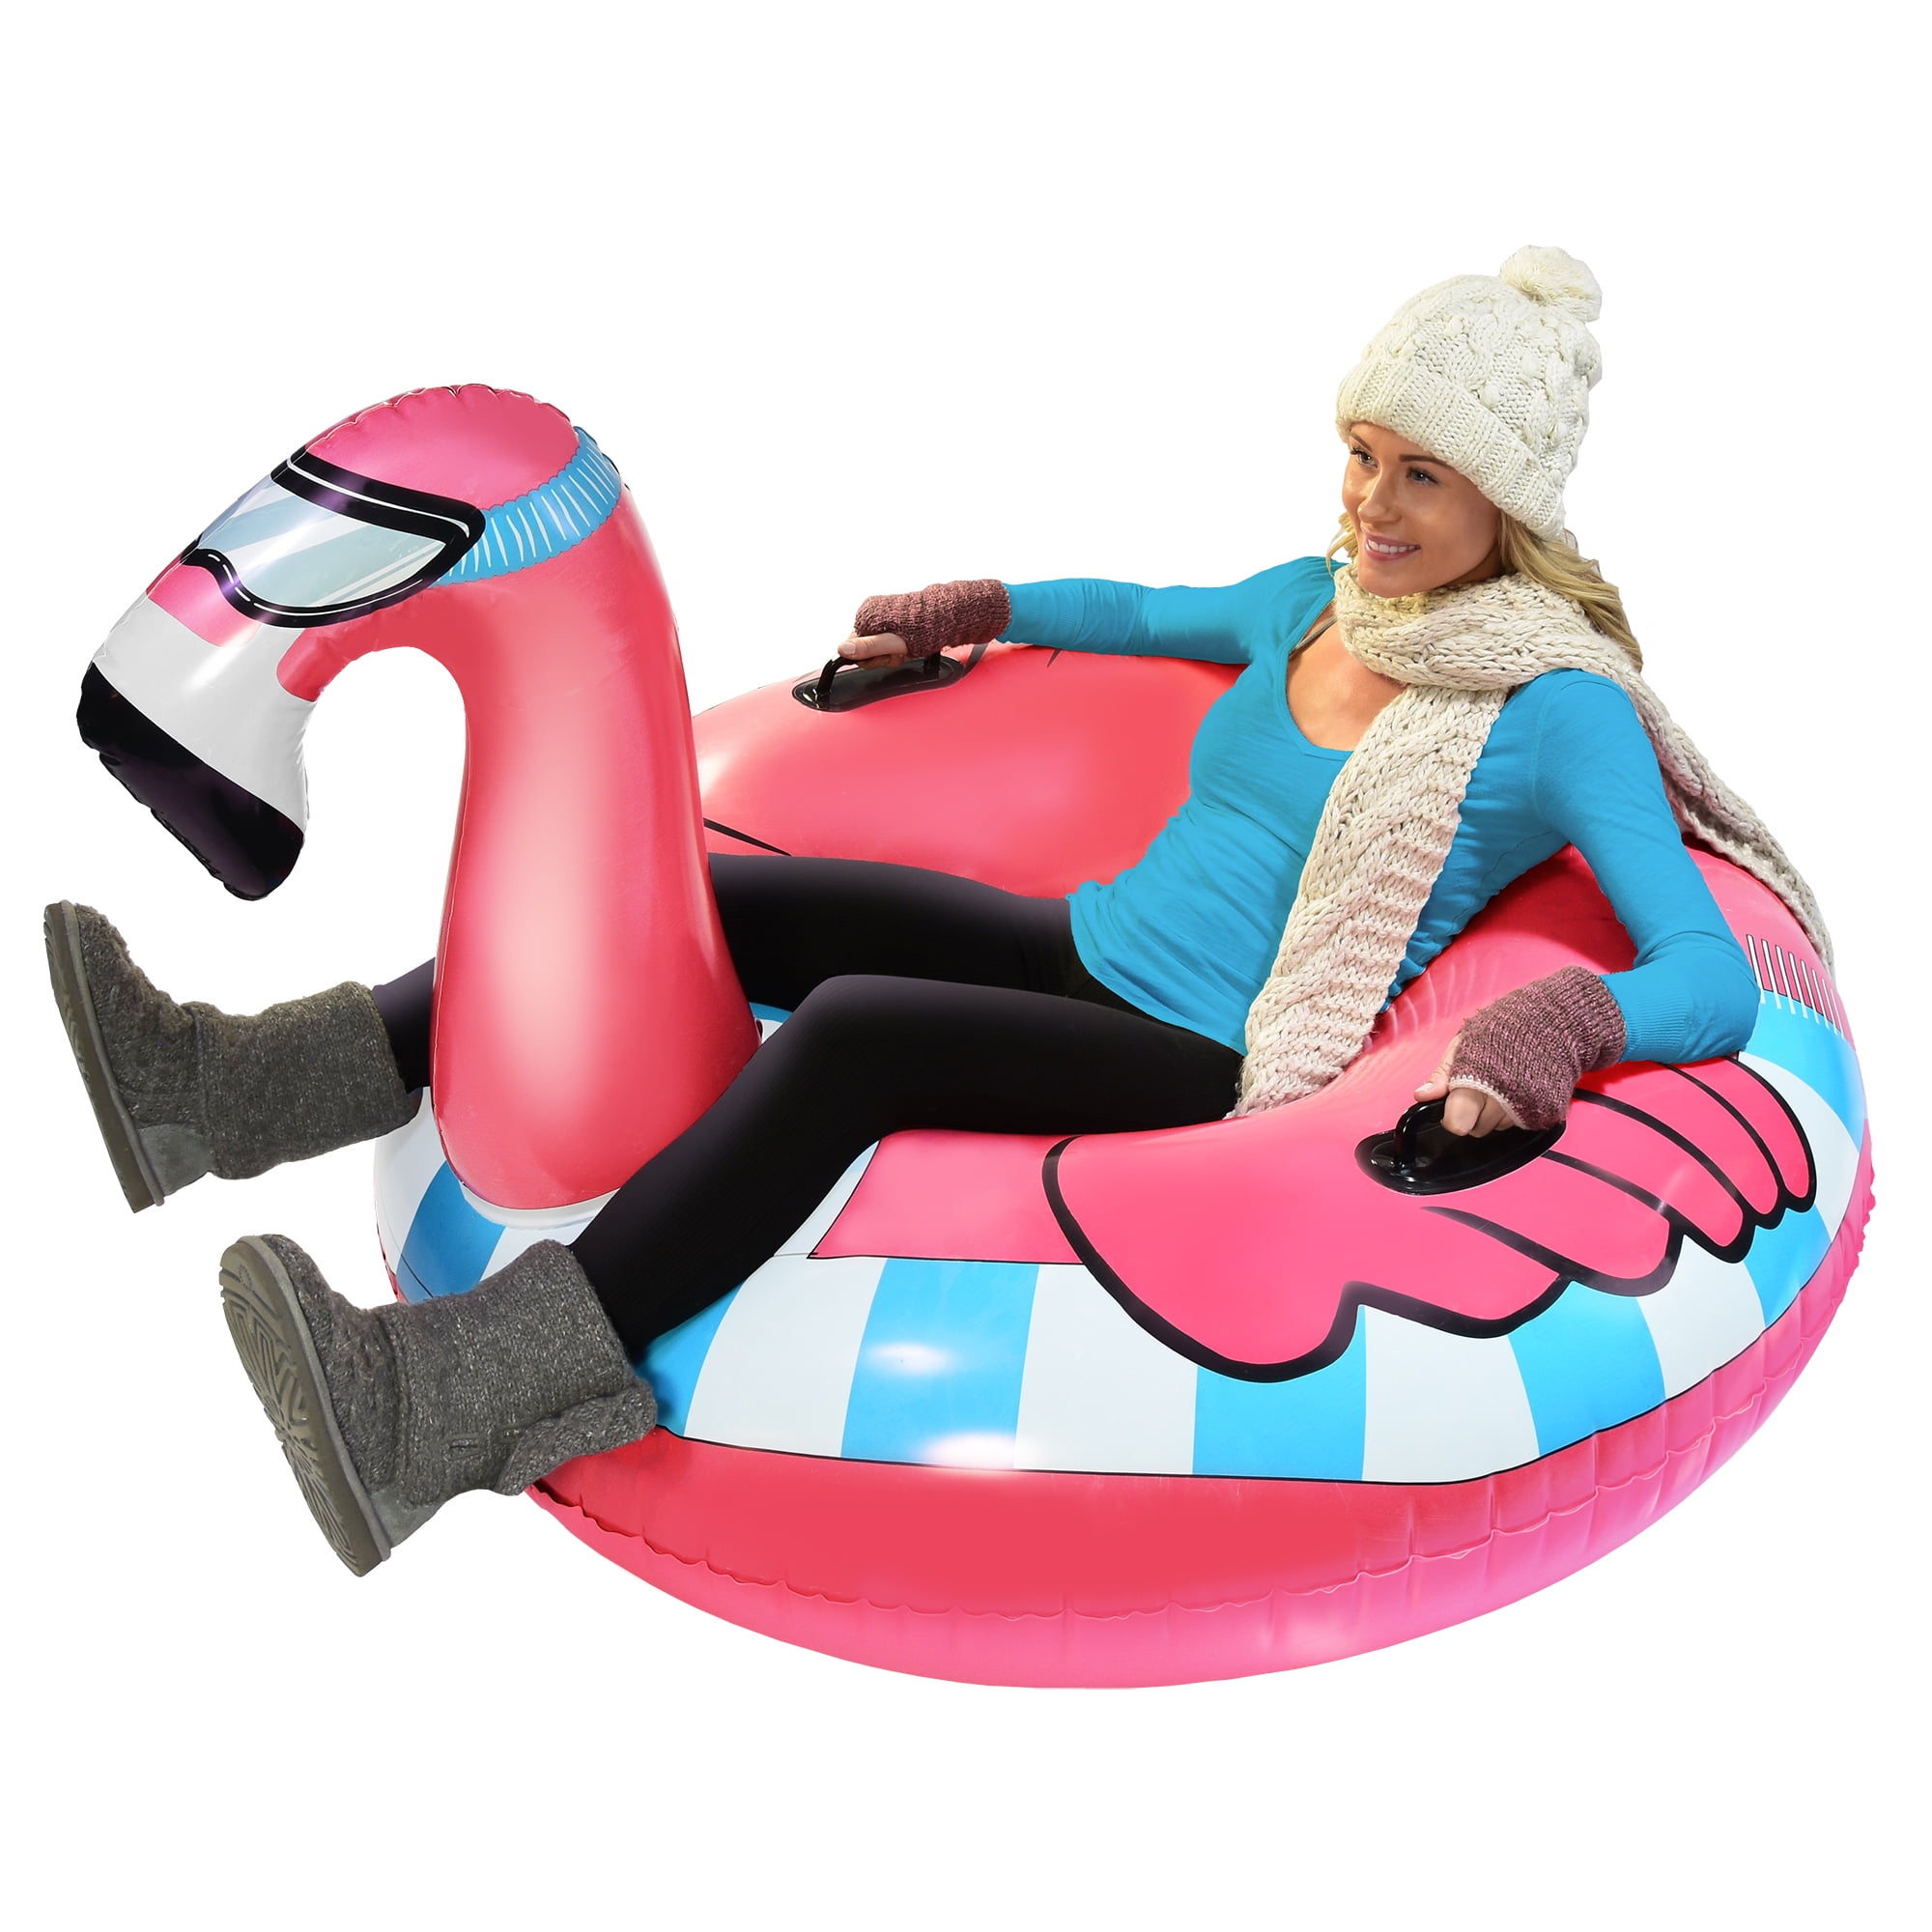 47.3 Large Heavy Duty PVC Snow Backrest Sledding Tube with 2 Handles for Adults & Kids Winter Outdoor Fun Entertainment IPHUNGO Inflatable Snow Tube